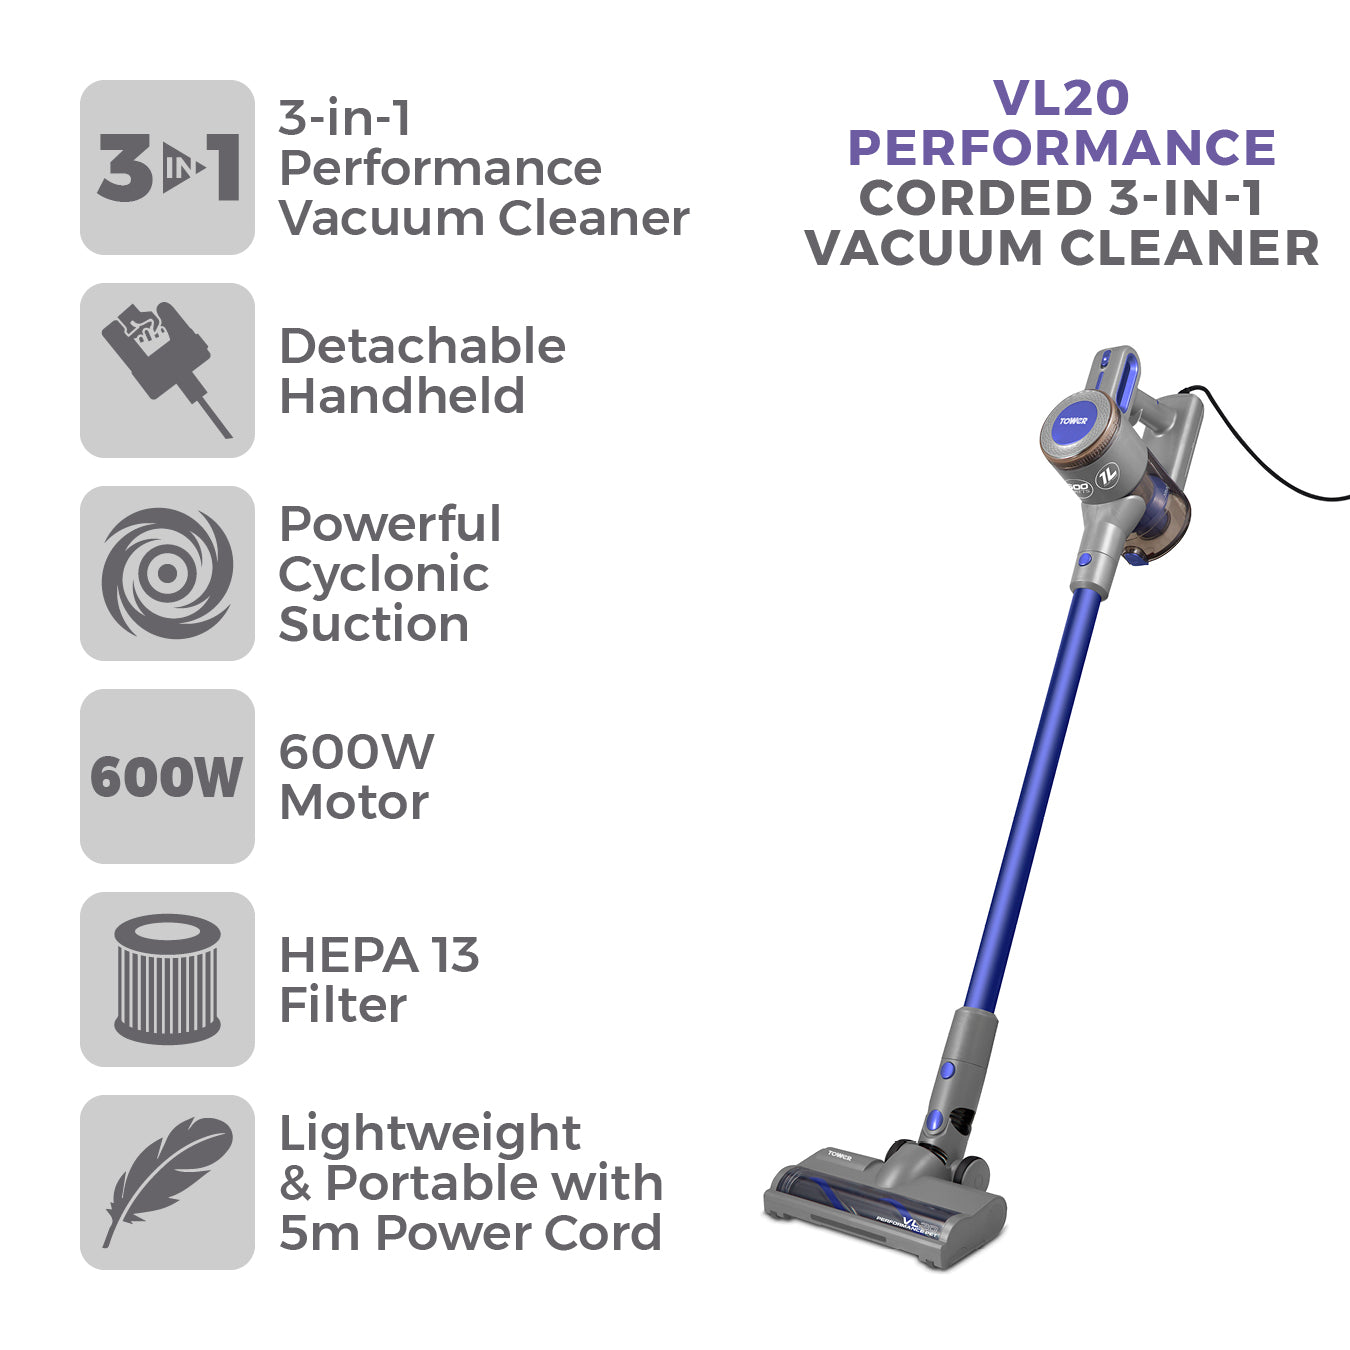 5056462346786 TOWER VL20 Pets Corded Stick 3 in 1 Corded Stick Vacuum Cleaner T513006PETS Brambles Cookshop 2